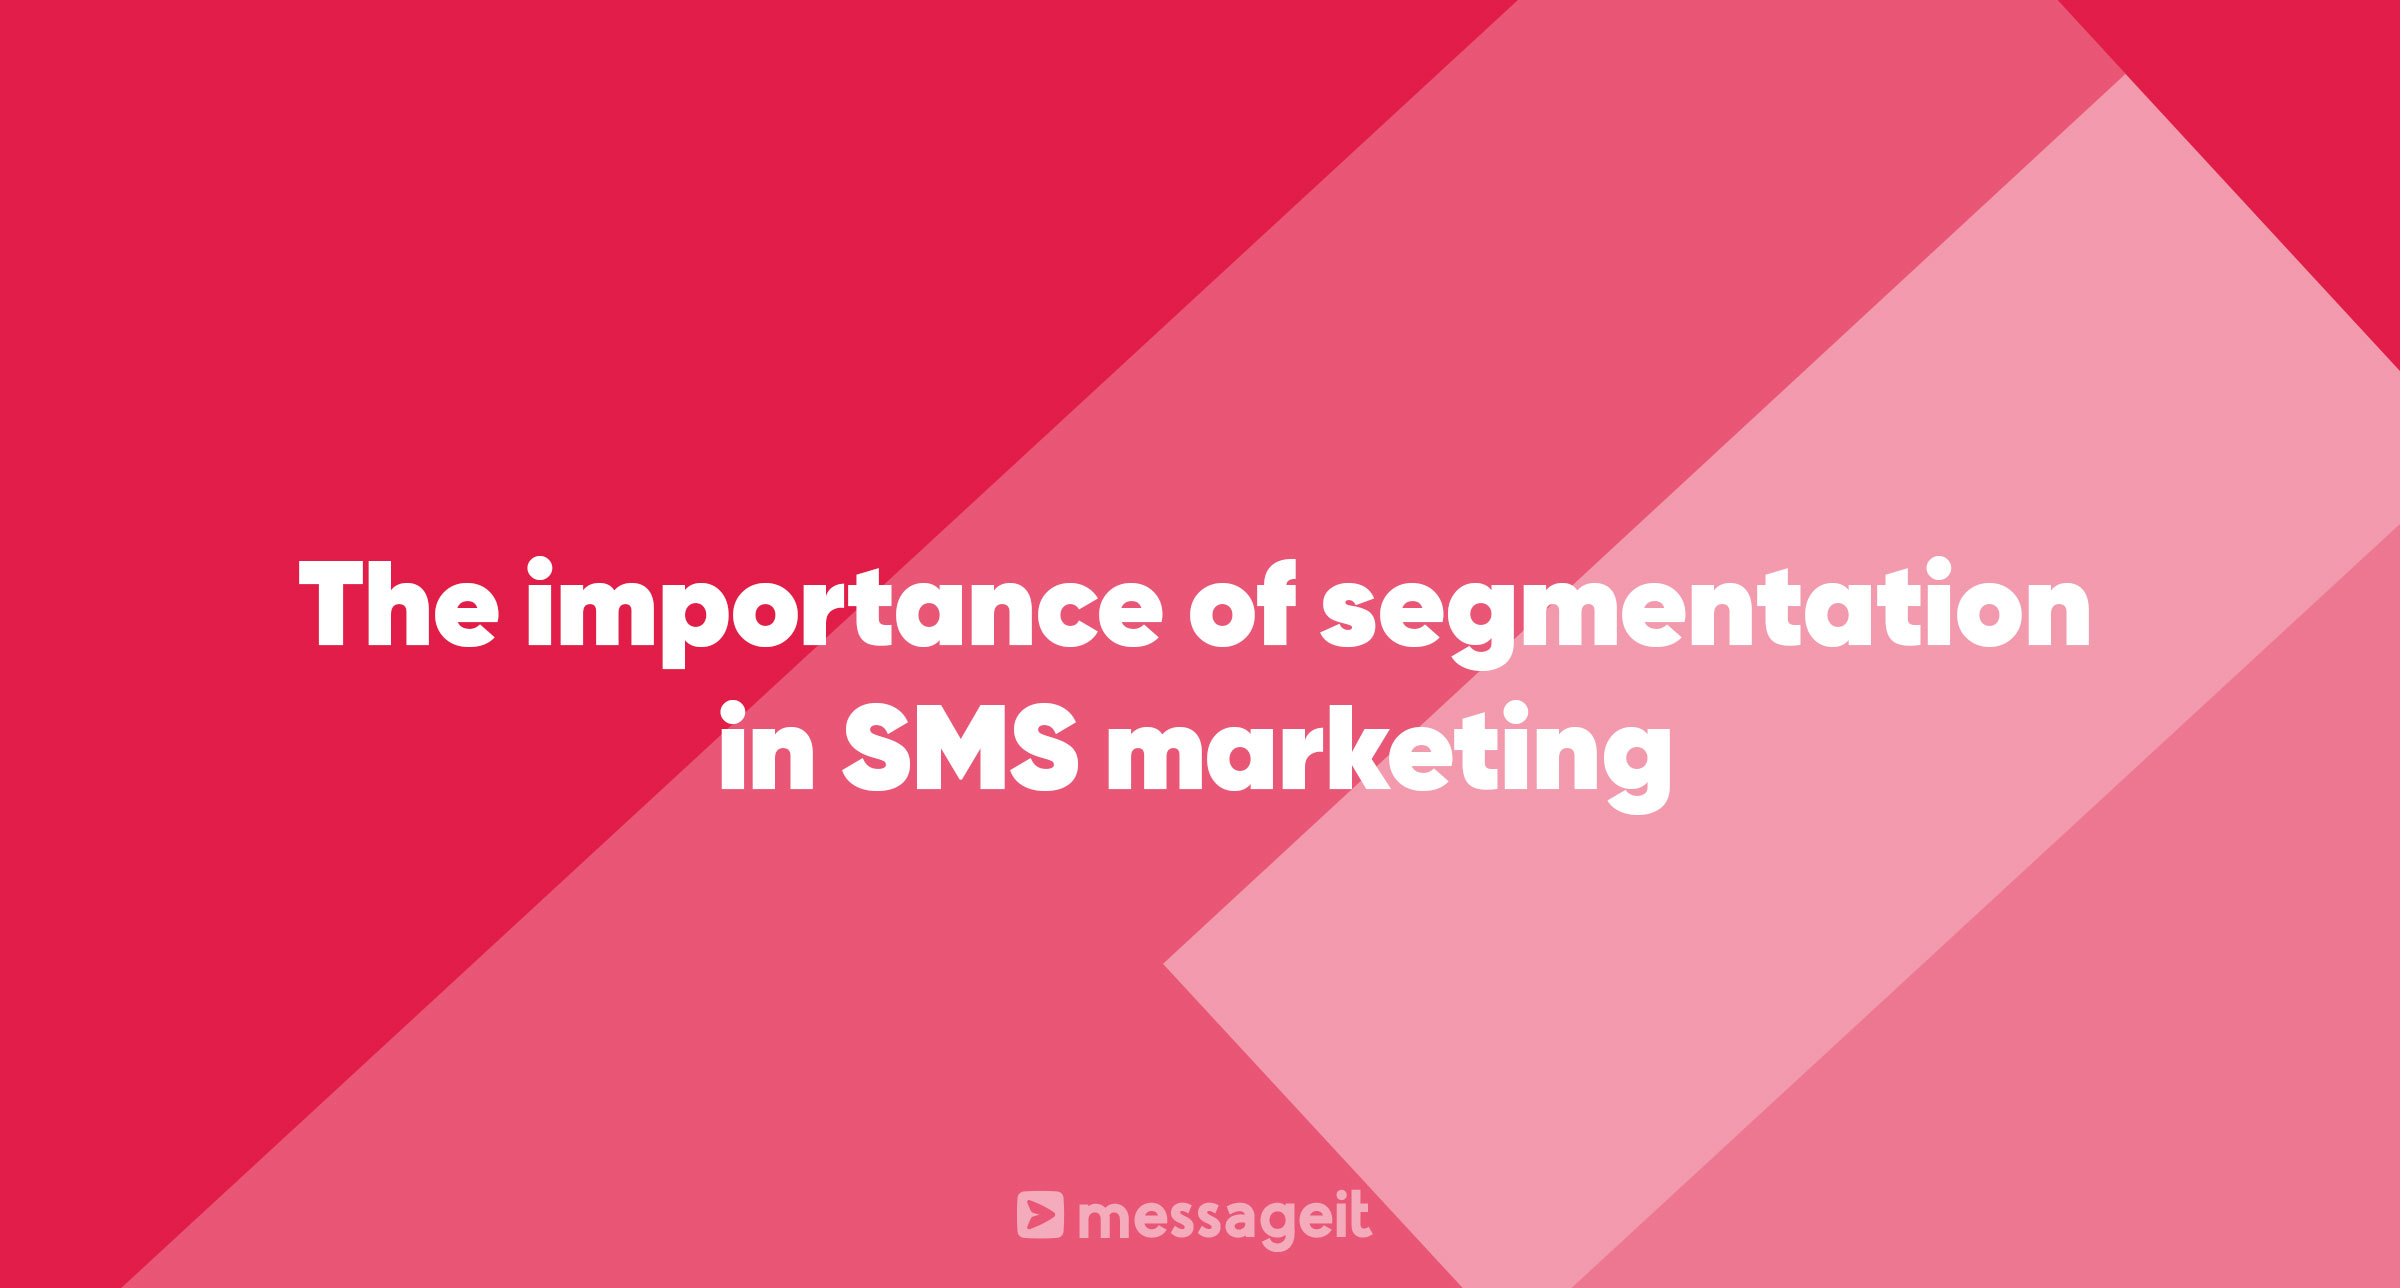 Article | The Importance of Segmentation in SMS Marketing